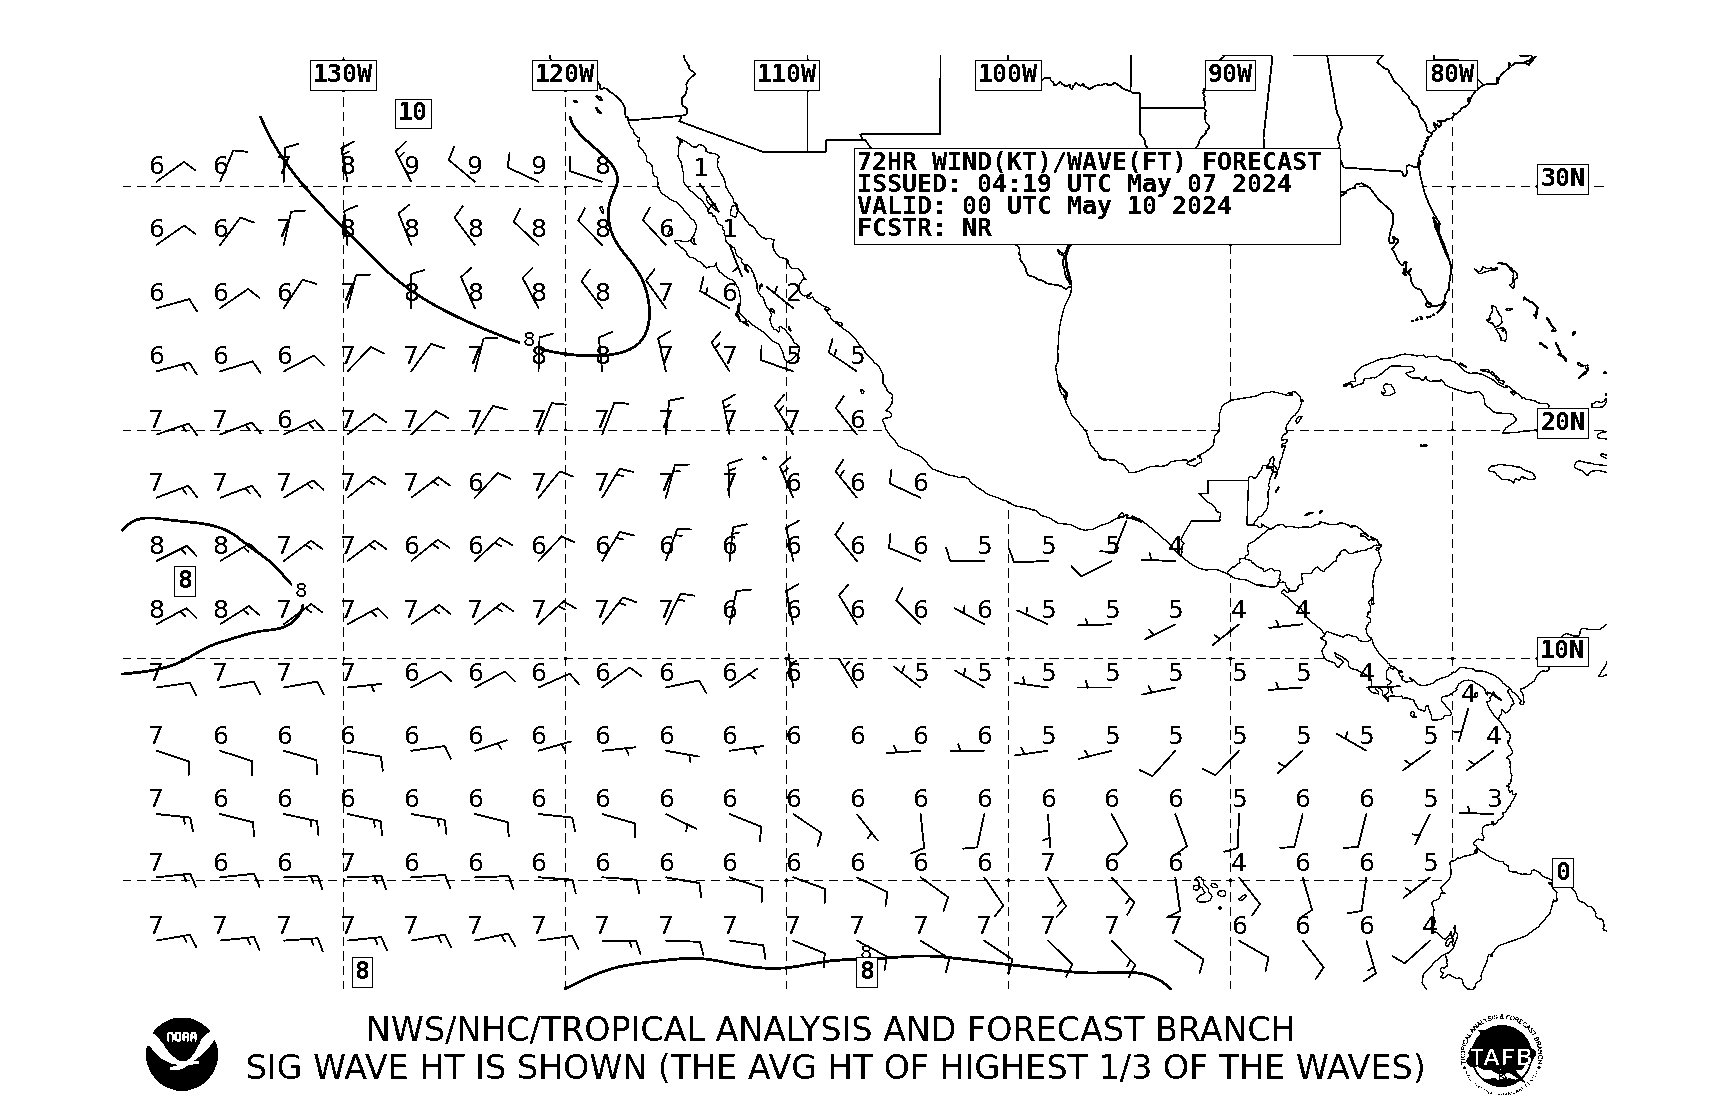 72 hour SE Pacific wind/wave